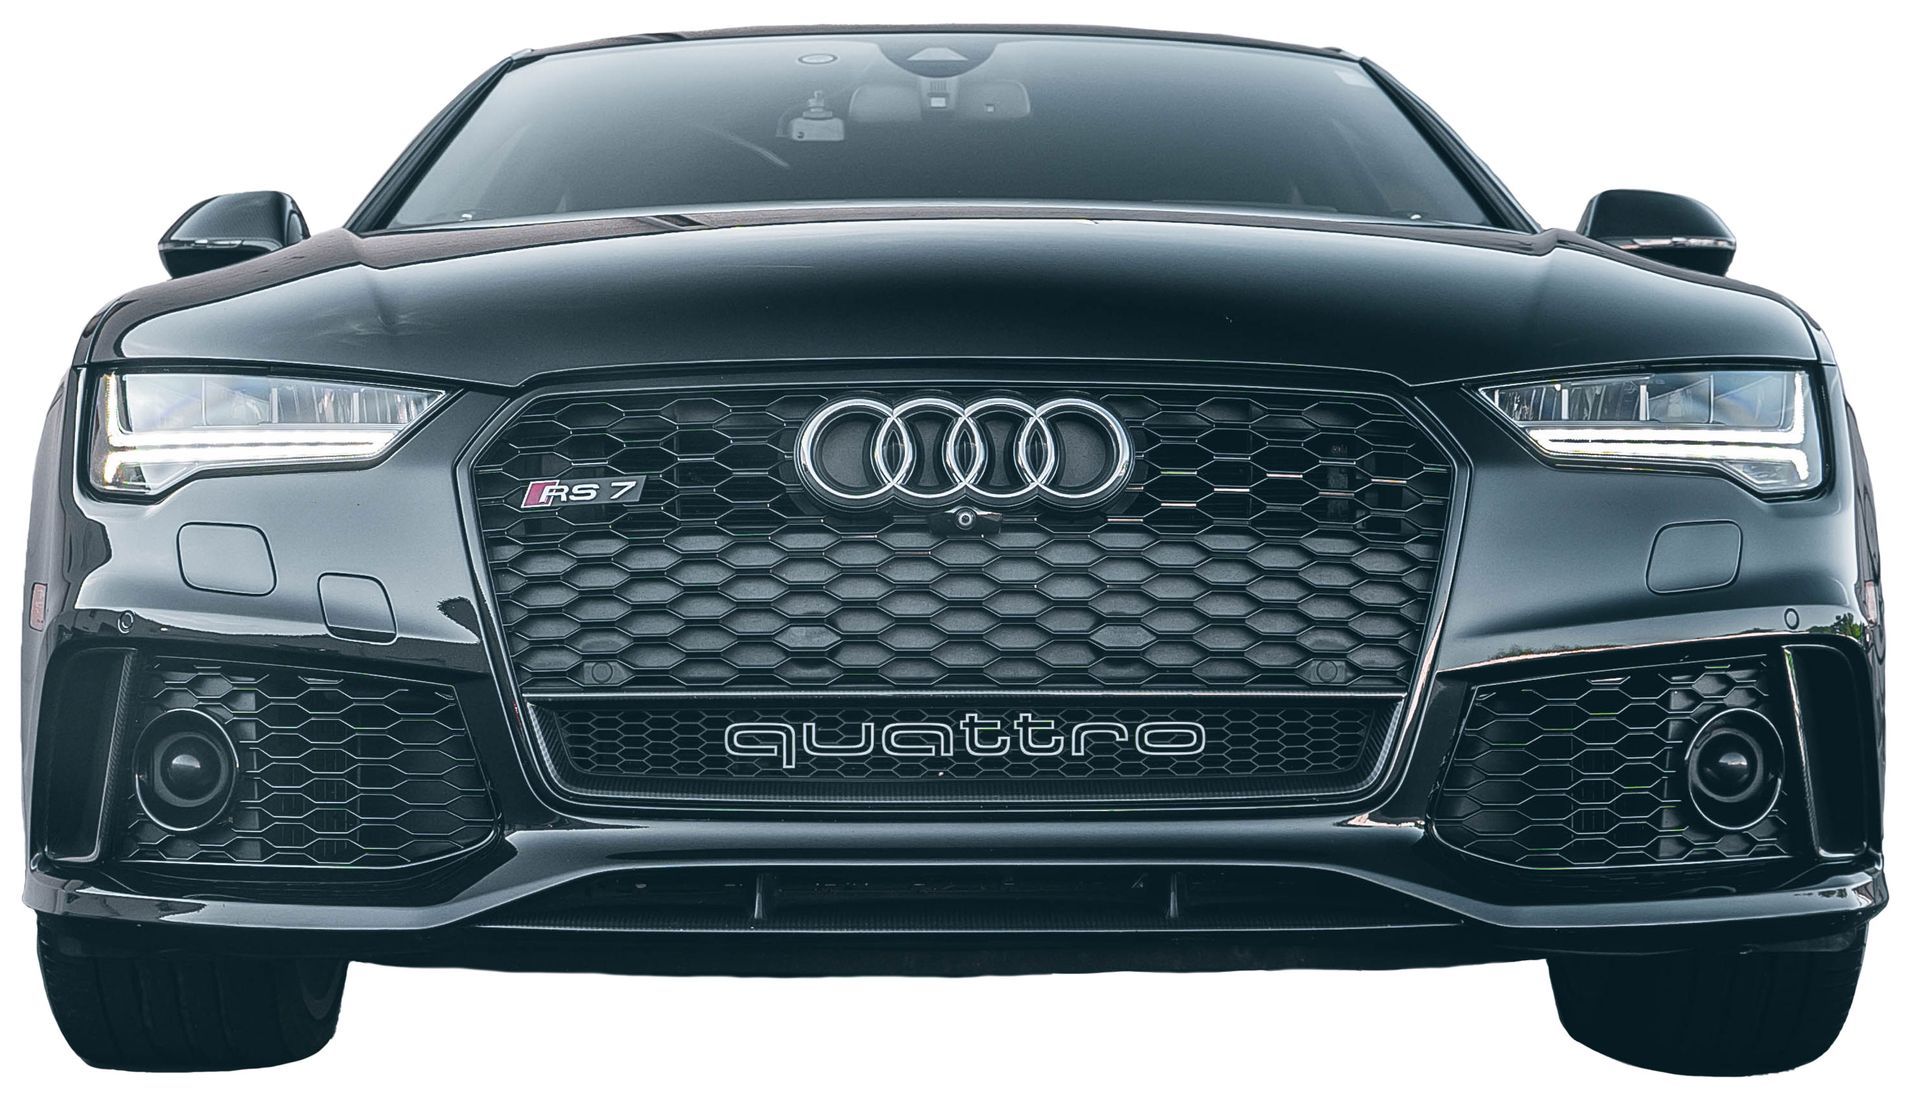 the front of a black audi rs7 is shown on a white background .